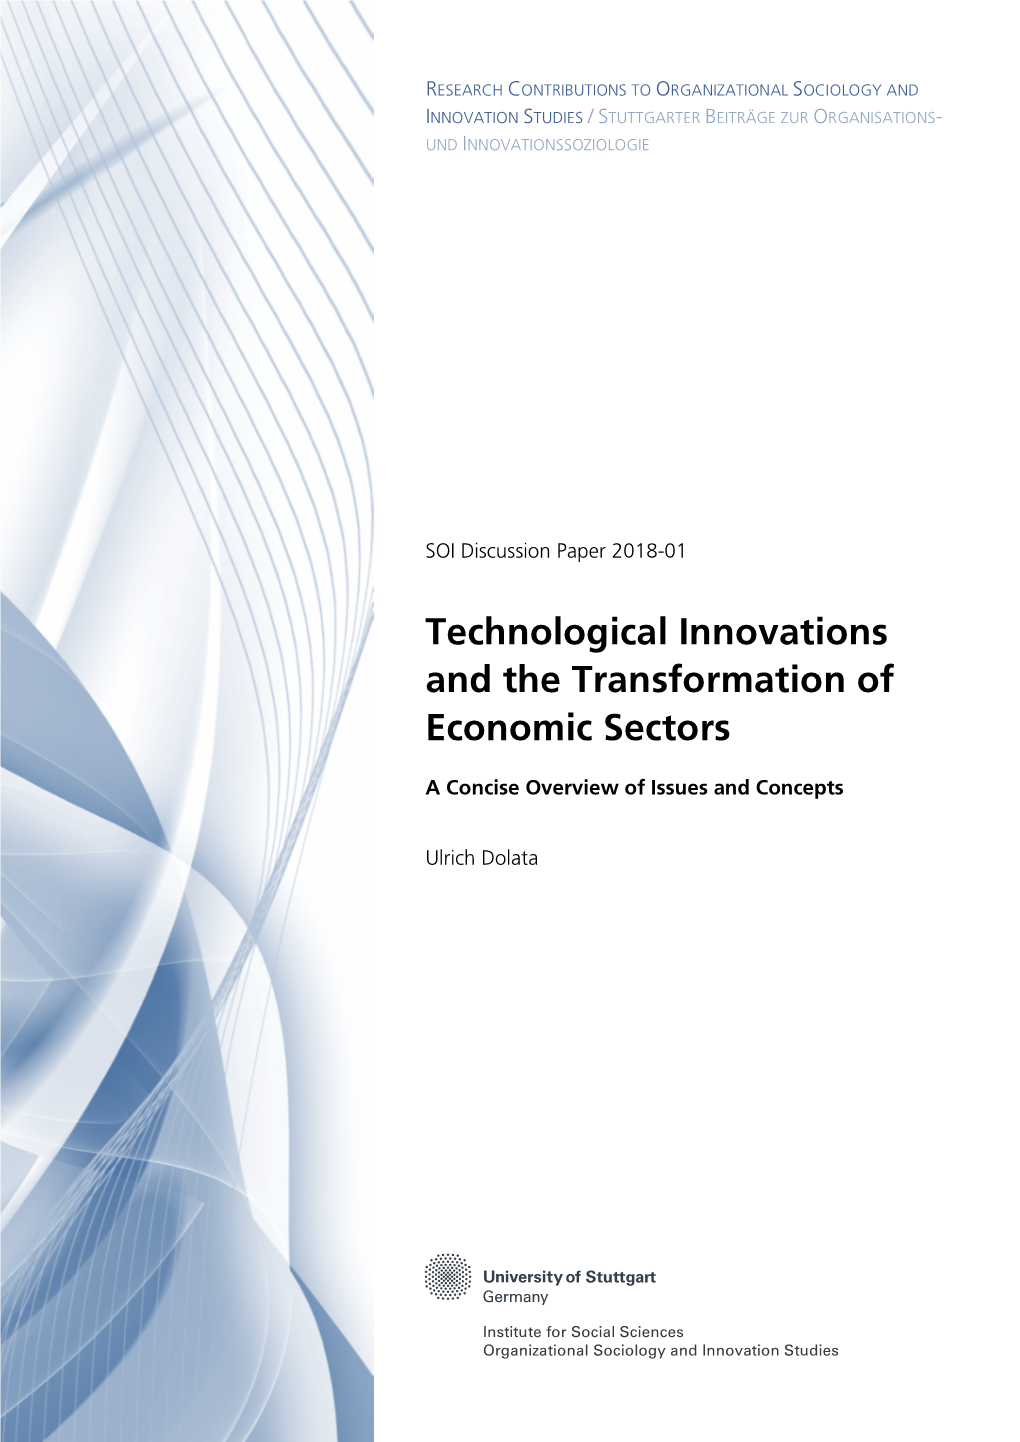 Technological Innovations and the Transformation of Economic Sectors